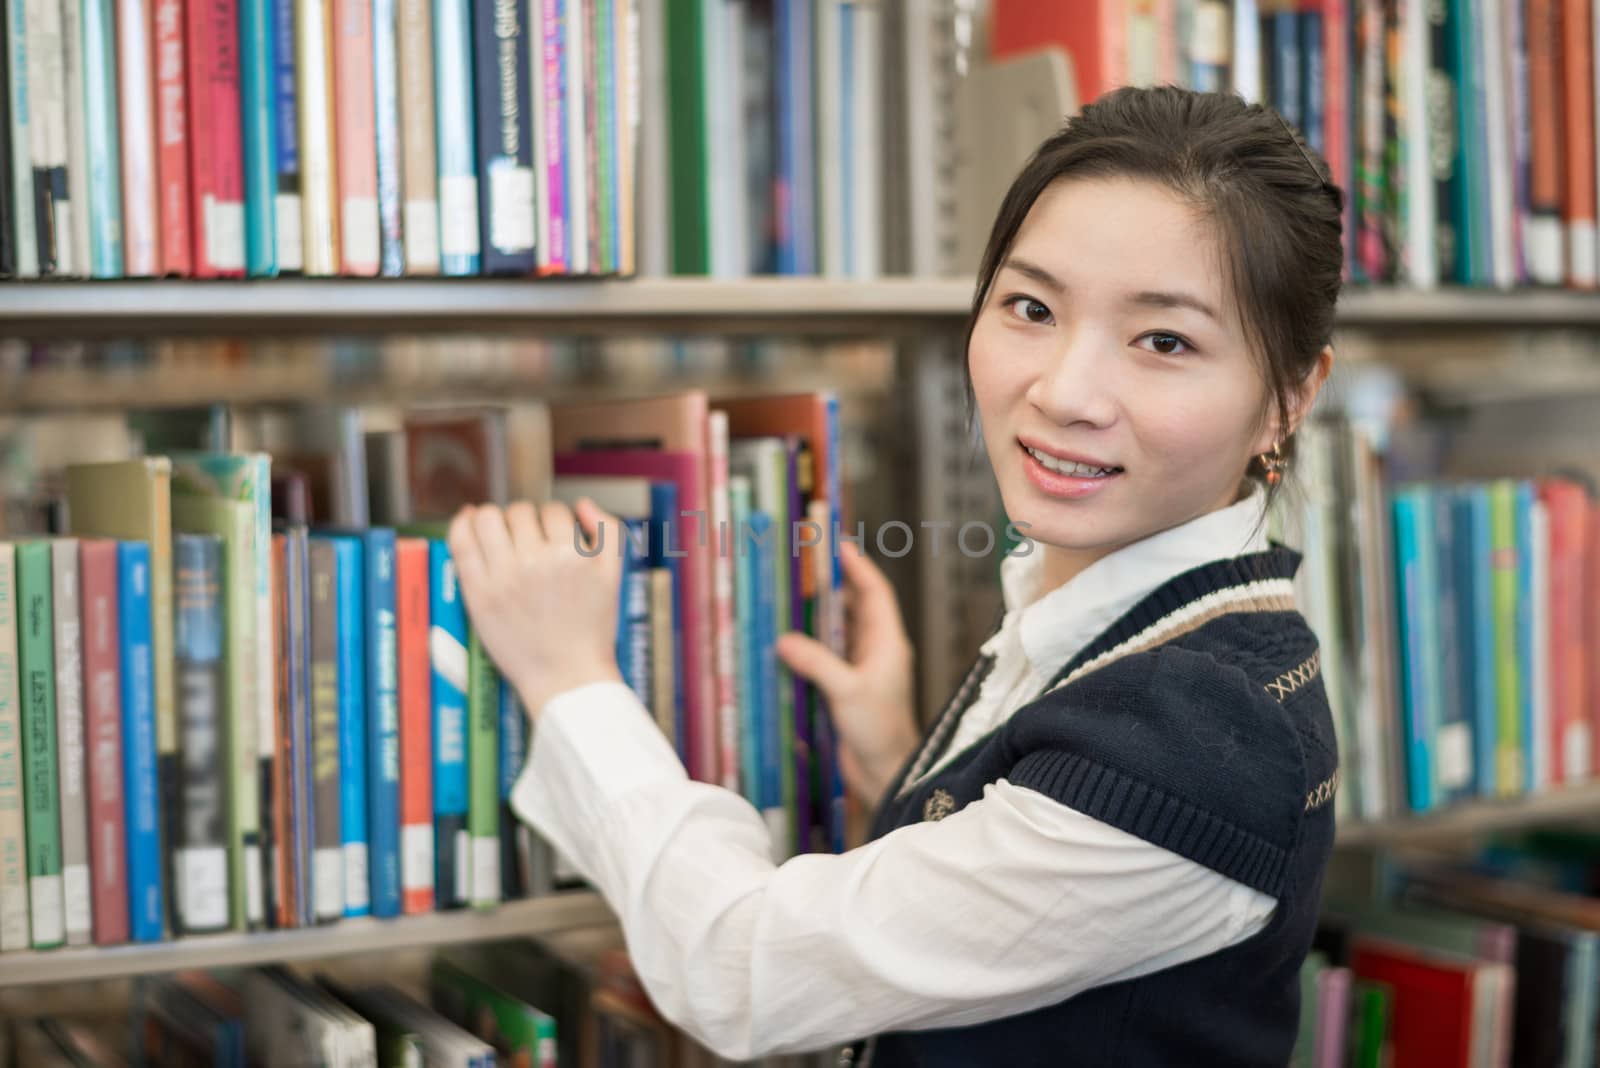 Portrait of young clever student standing in front of a bookshelf in library